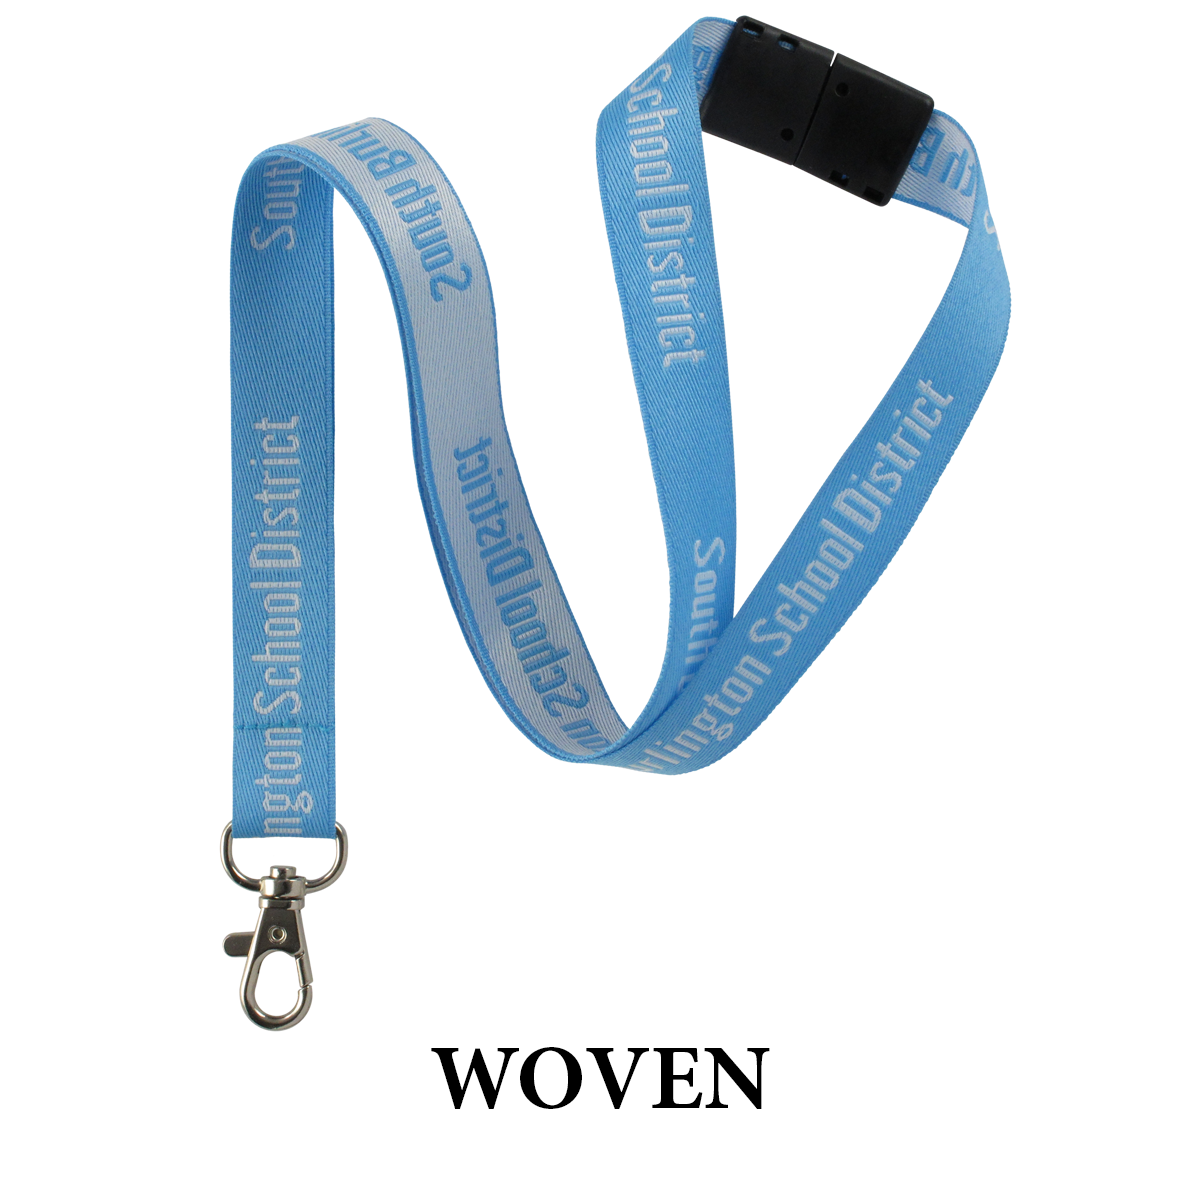 A blue woven lanyard with "School District" text in white, featuring a black plastic buckle and a metal clasp. Perfect for large orders, take advantage of quantity discounts on Custom Printed Lanyards Online Designer - Personalized Lanyards for Company, Conference, and VIP Events.